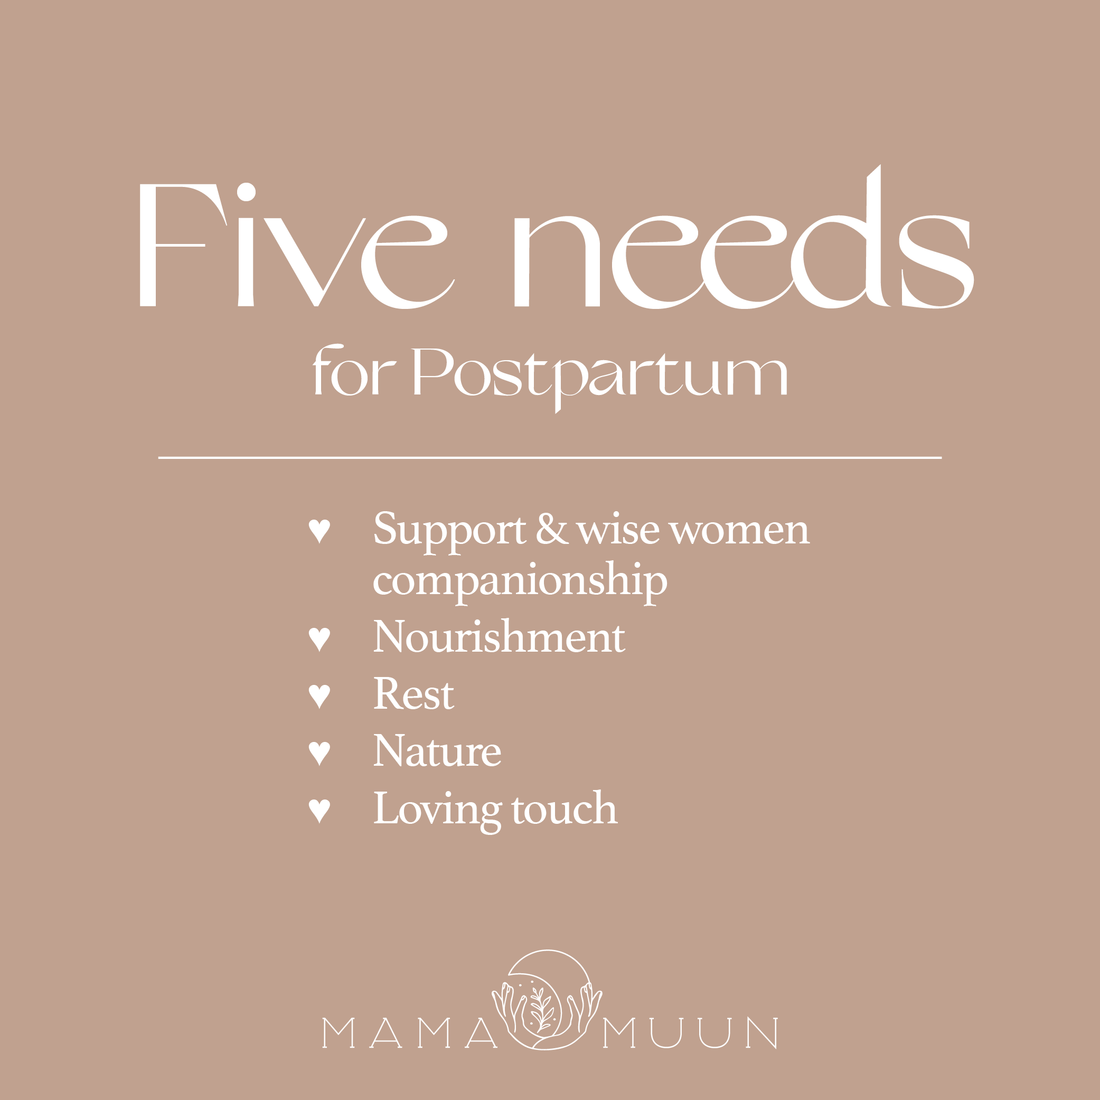 What do you need Postpartum